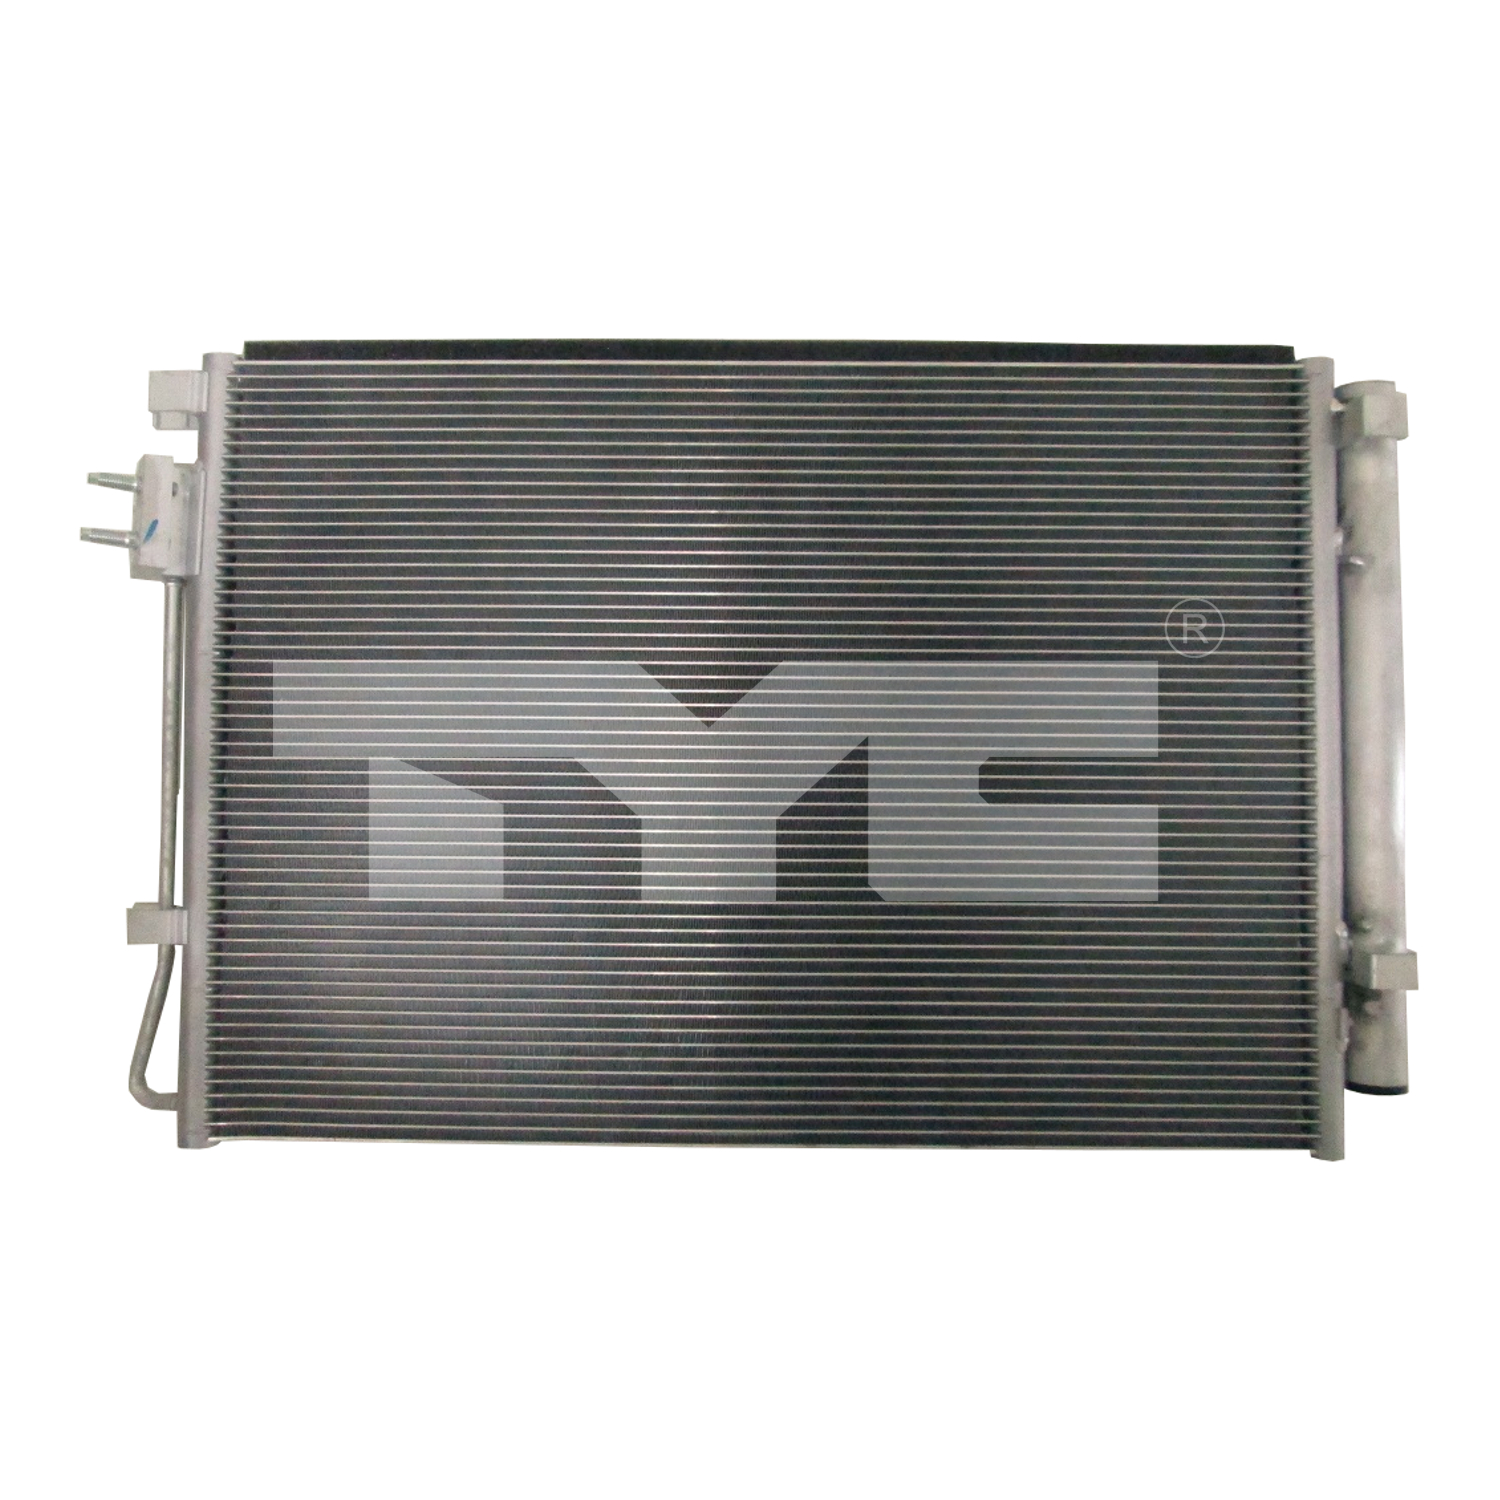 Aftermarket AC CONDENSERS for HYUNDAI - ACCENT, ACCENT,18-22,Air conditioning condenser